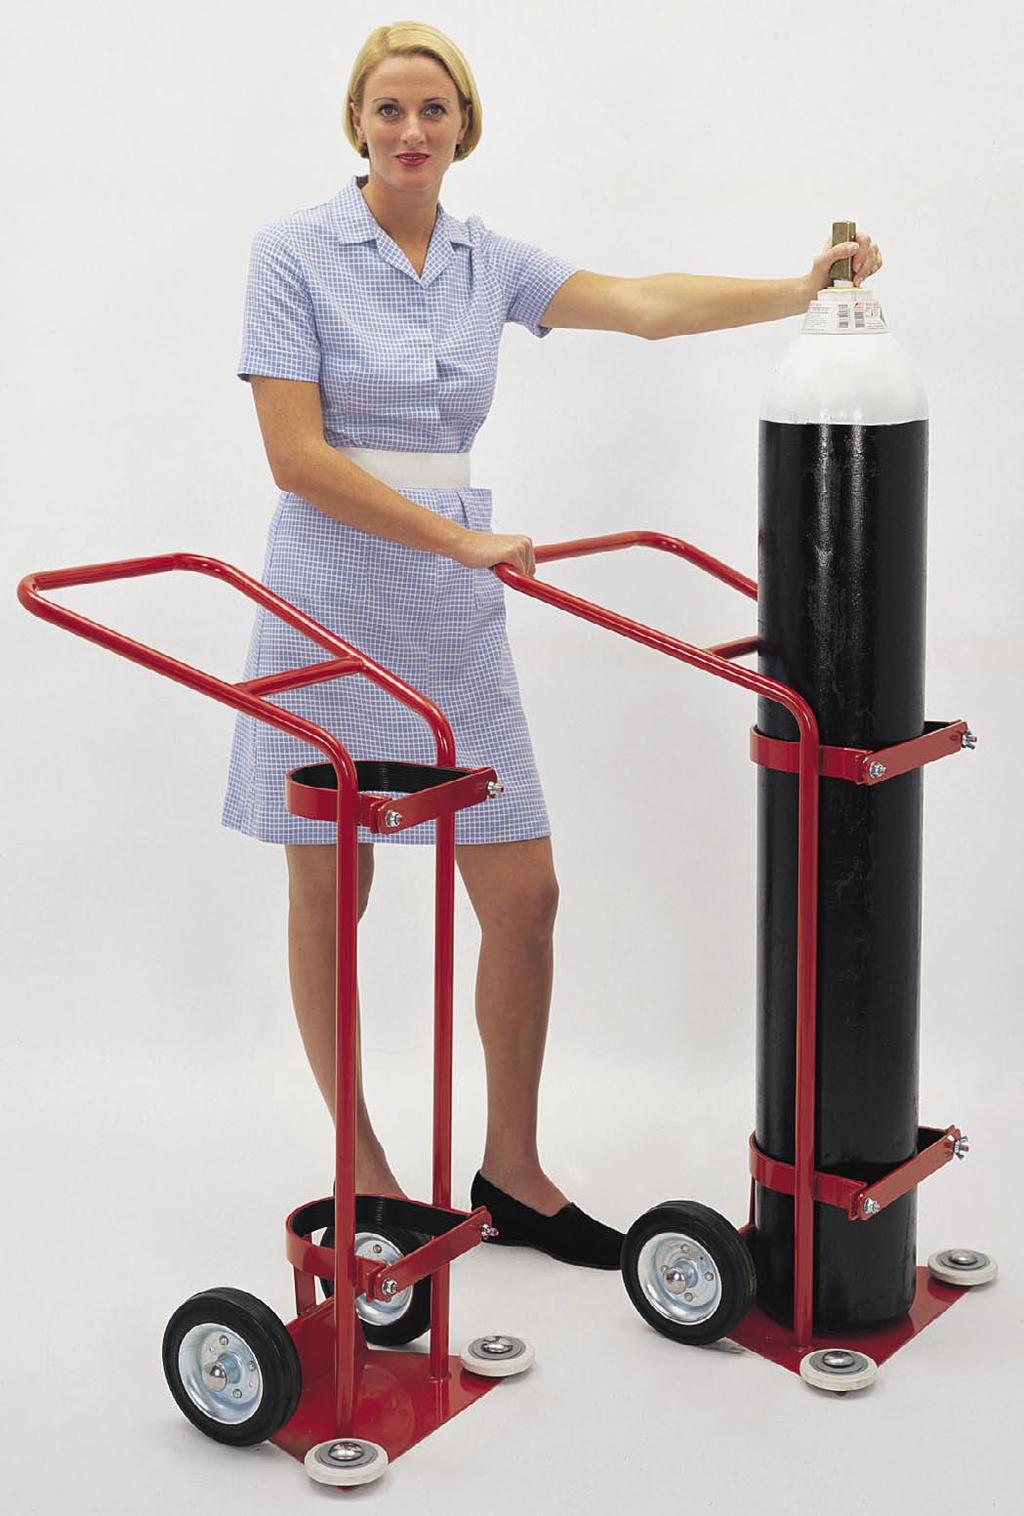 76 Cylinder Handling Oxygen Cylinder Trolleys Ideal for all medical services Ideal for hospitals, medical centres, pharmaceutical companies and